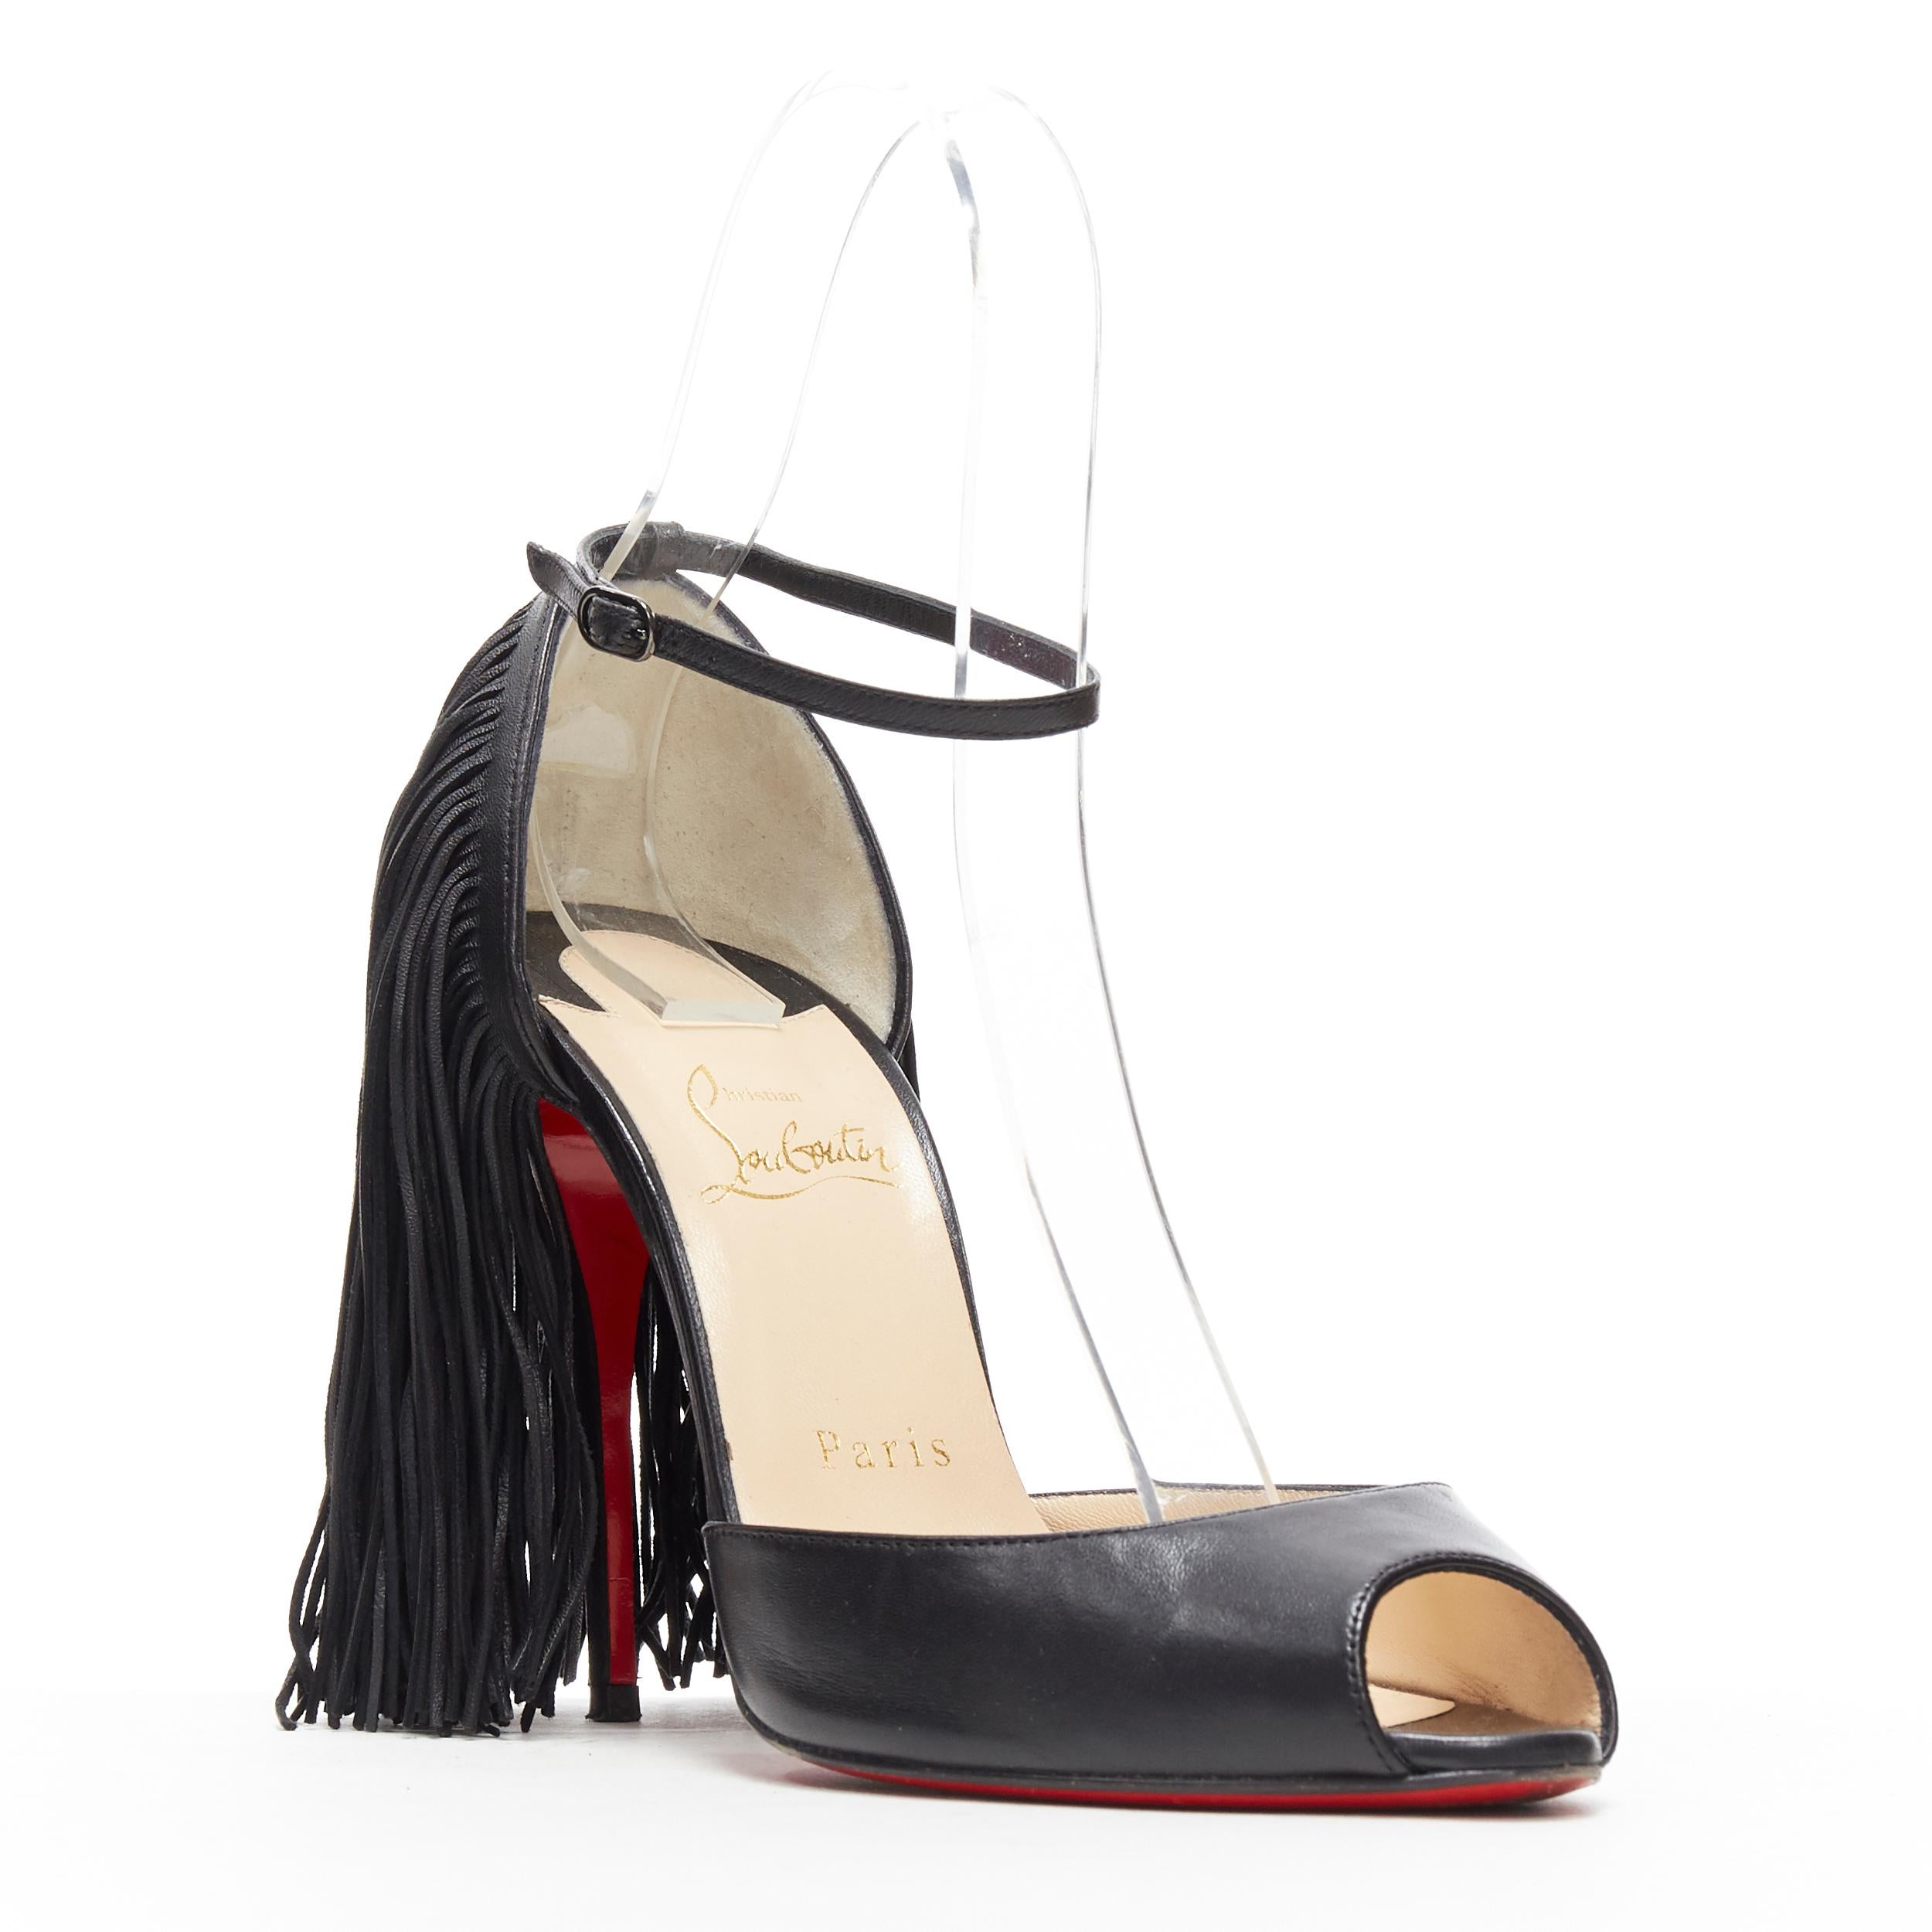 CHRISTIAN LOUBOUTIN Otrot 110 black leather fringe heel peep toe pumps EU37
Brand: Christian Louboutin
Designer: Christian Louboutin
Model Name / Style: Otrot 120
Material: Leather
Color: Black
Pattern: Solid
Closure: Buckle
Extra Detail: Ultra High